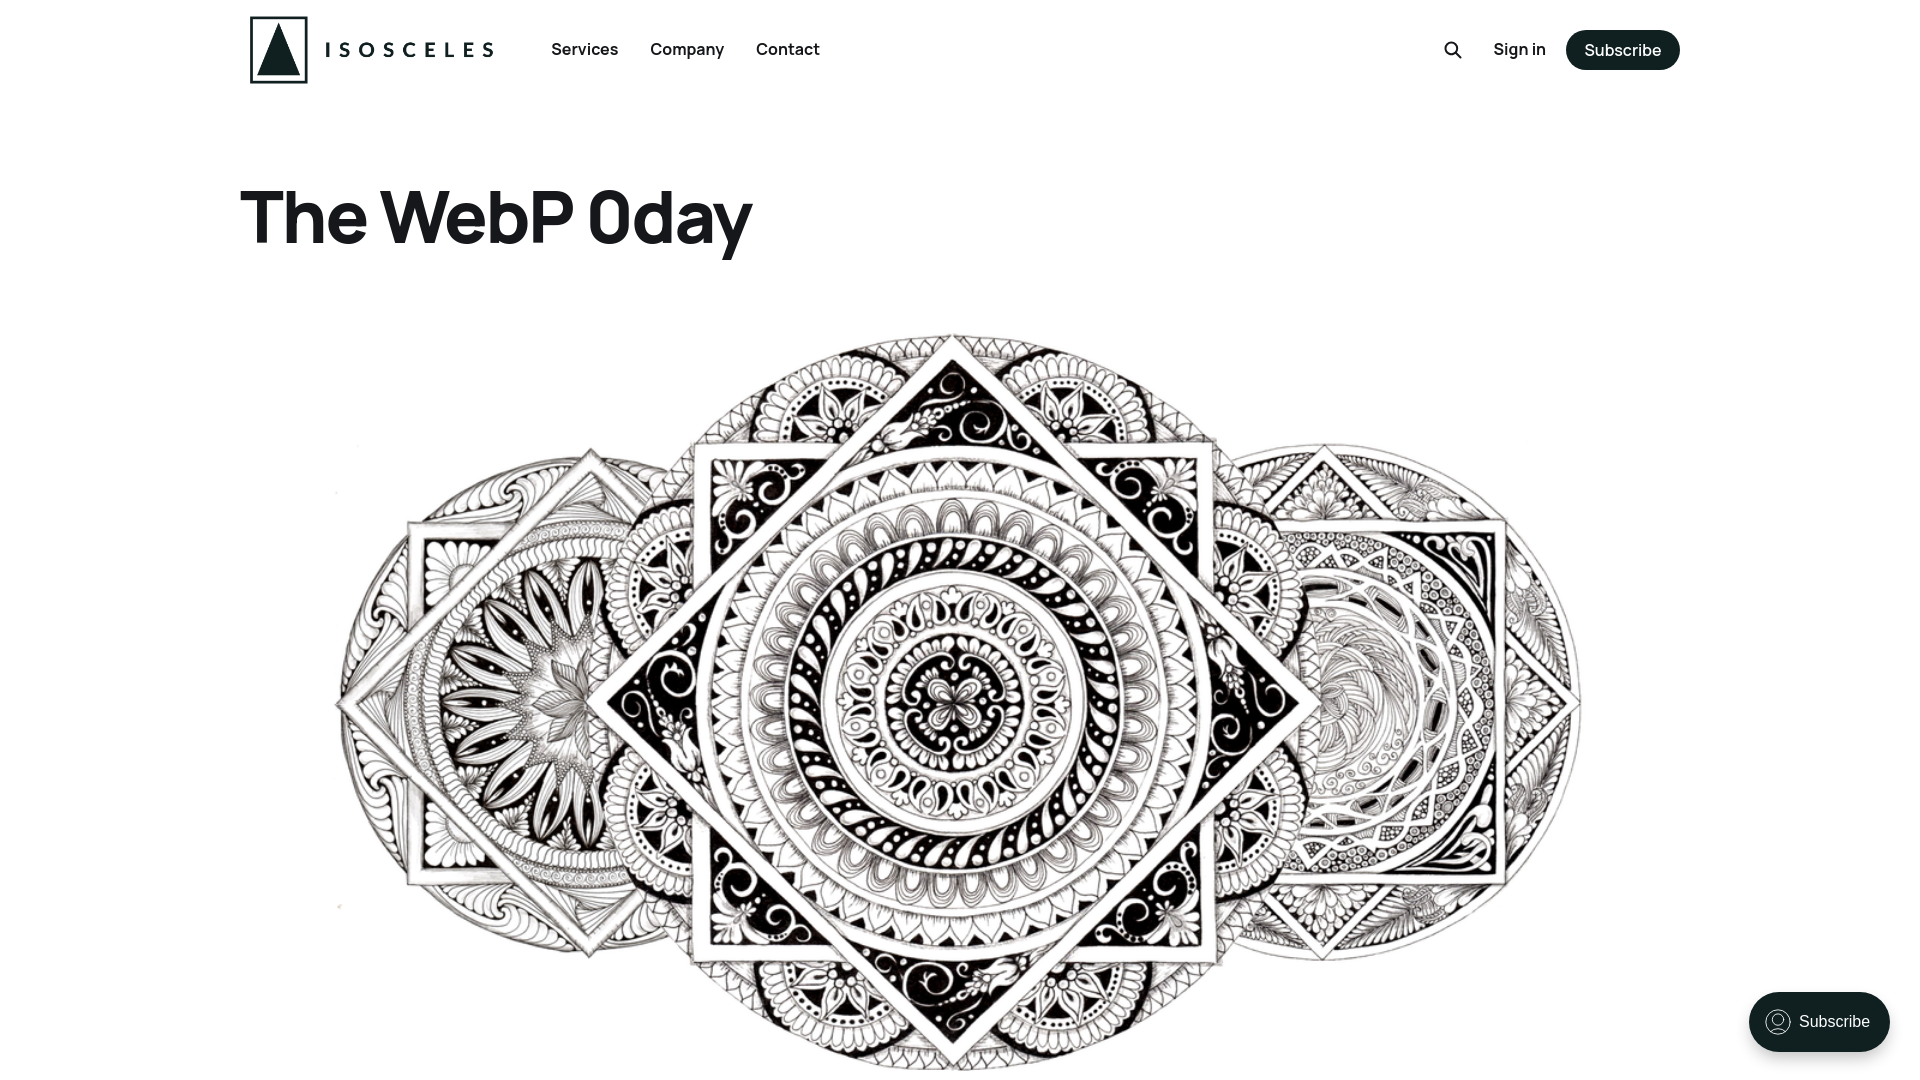 The WebP 0day